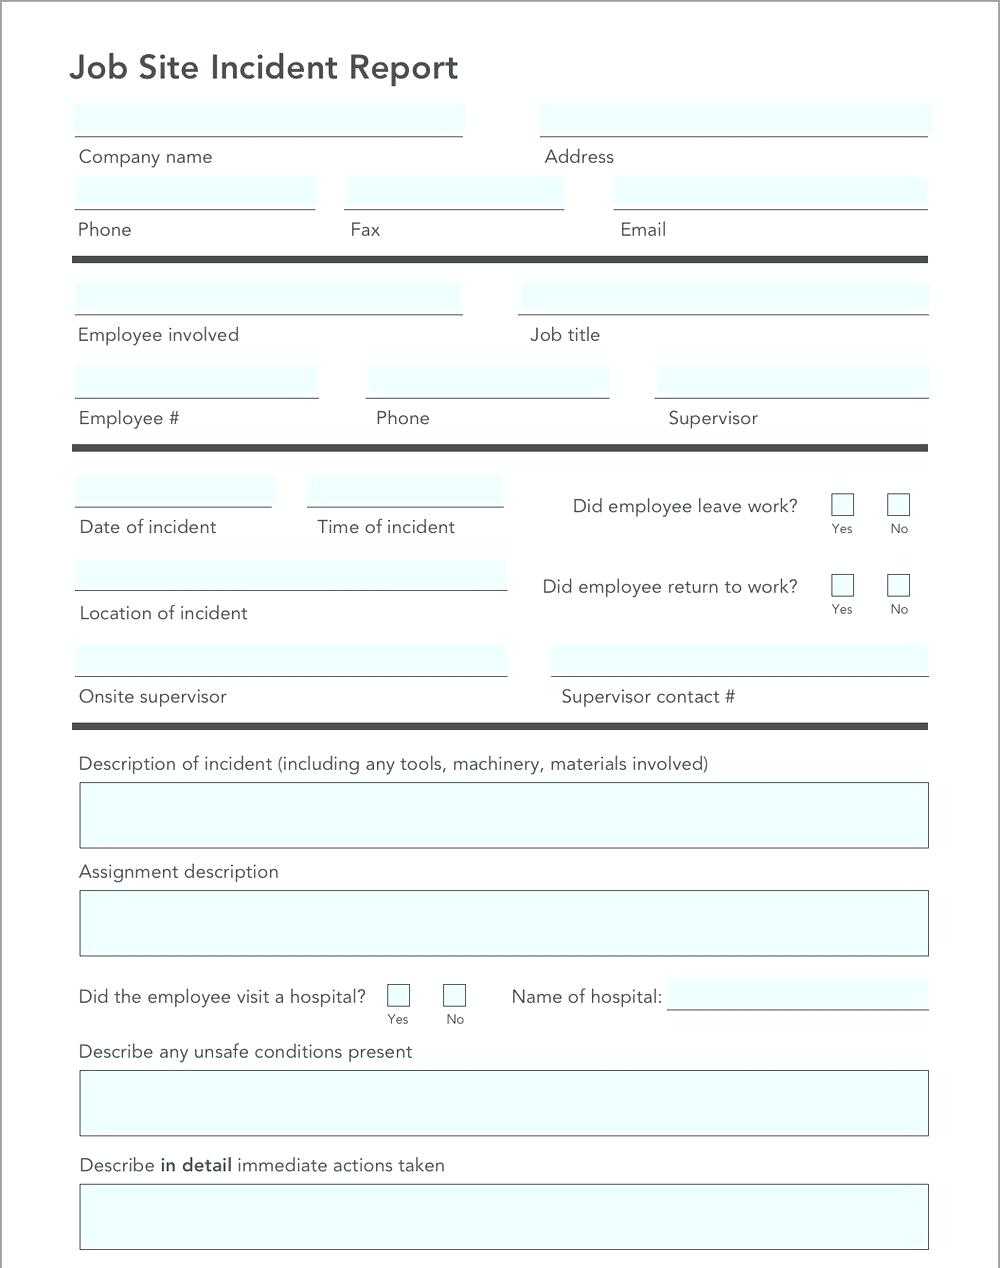 Incident Report Form Template Free Download – Vmarques With Site Visit Report Template Free Download